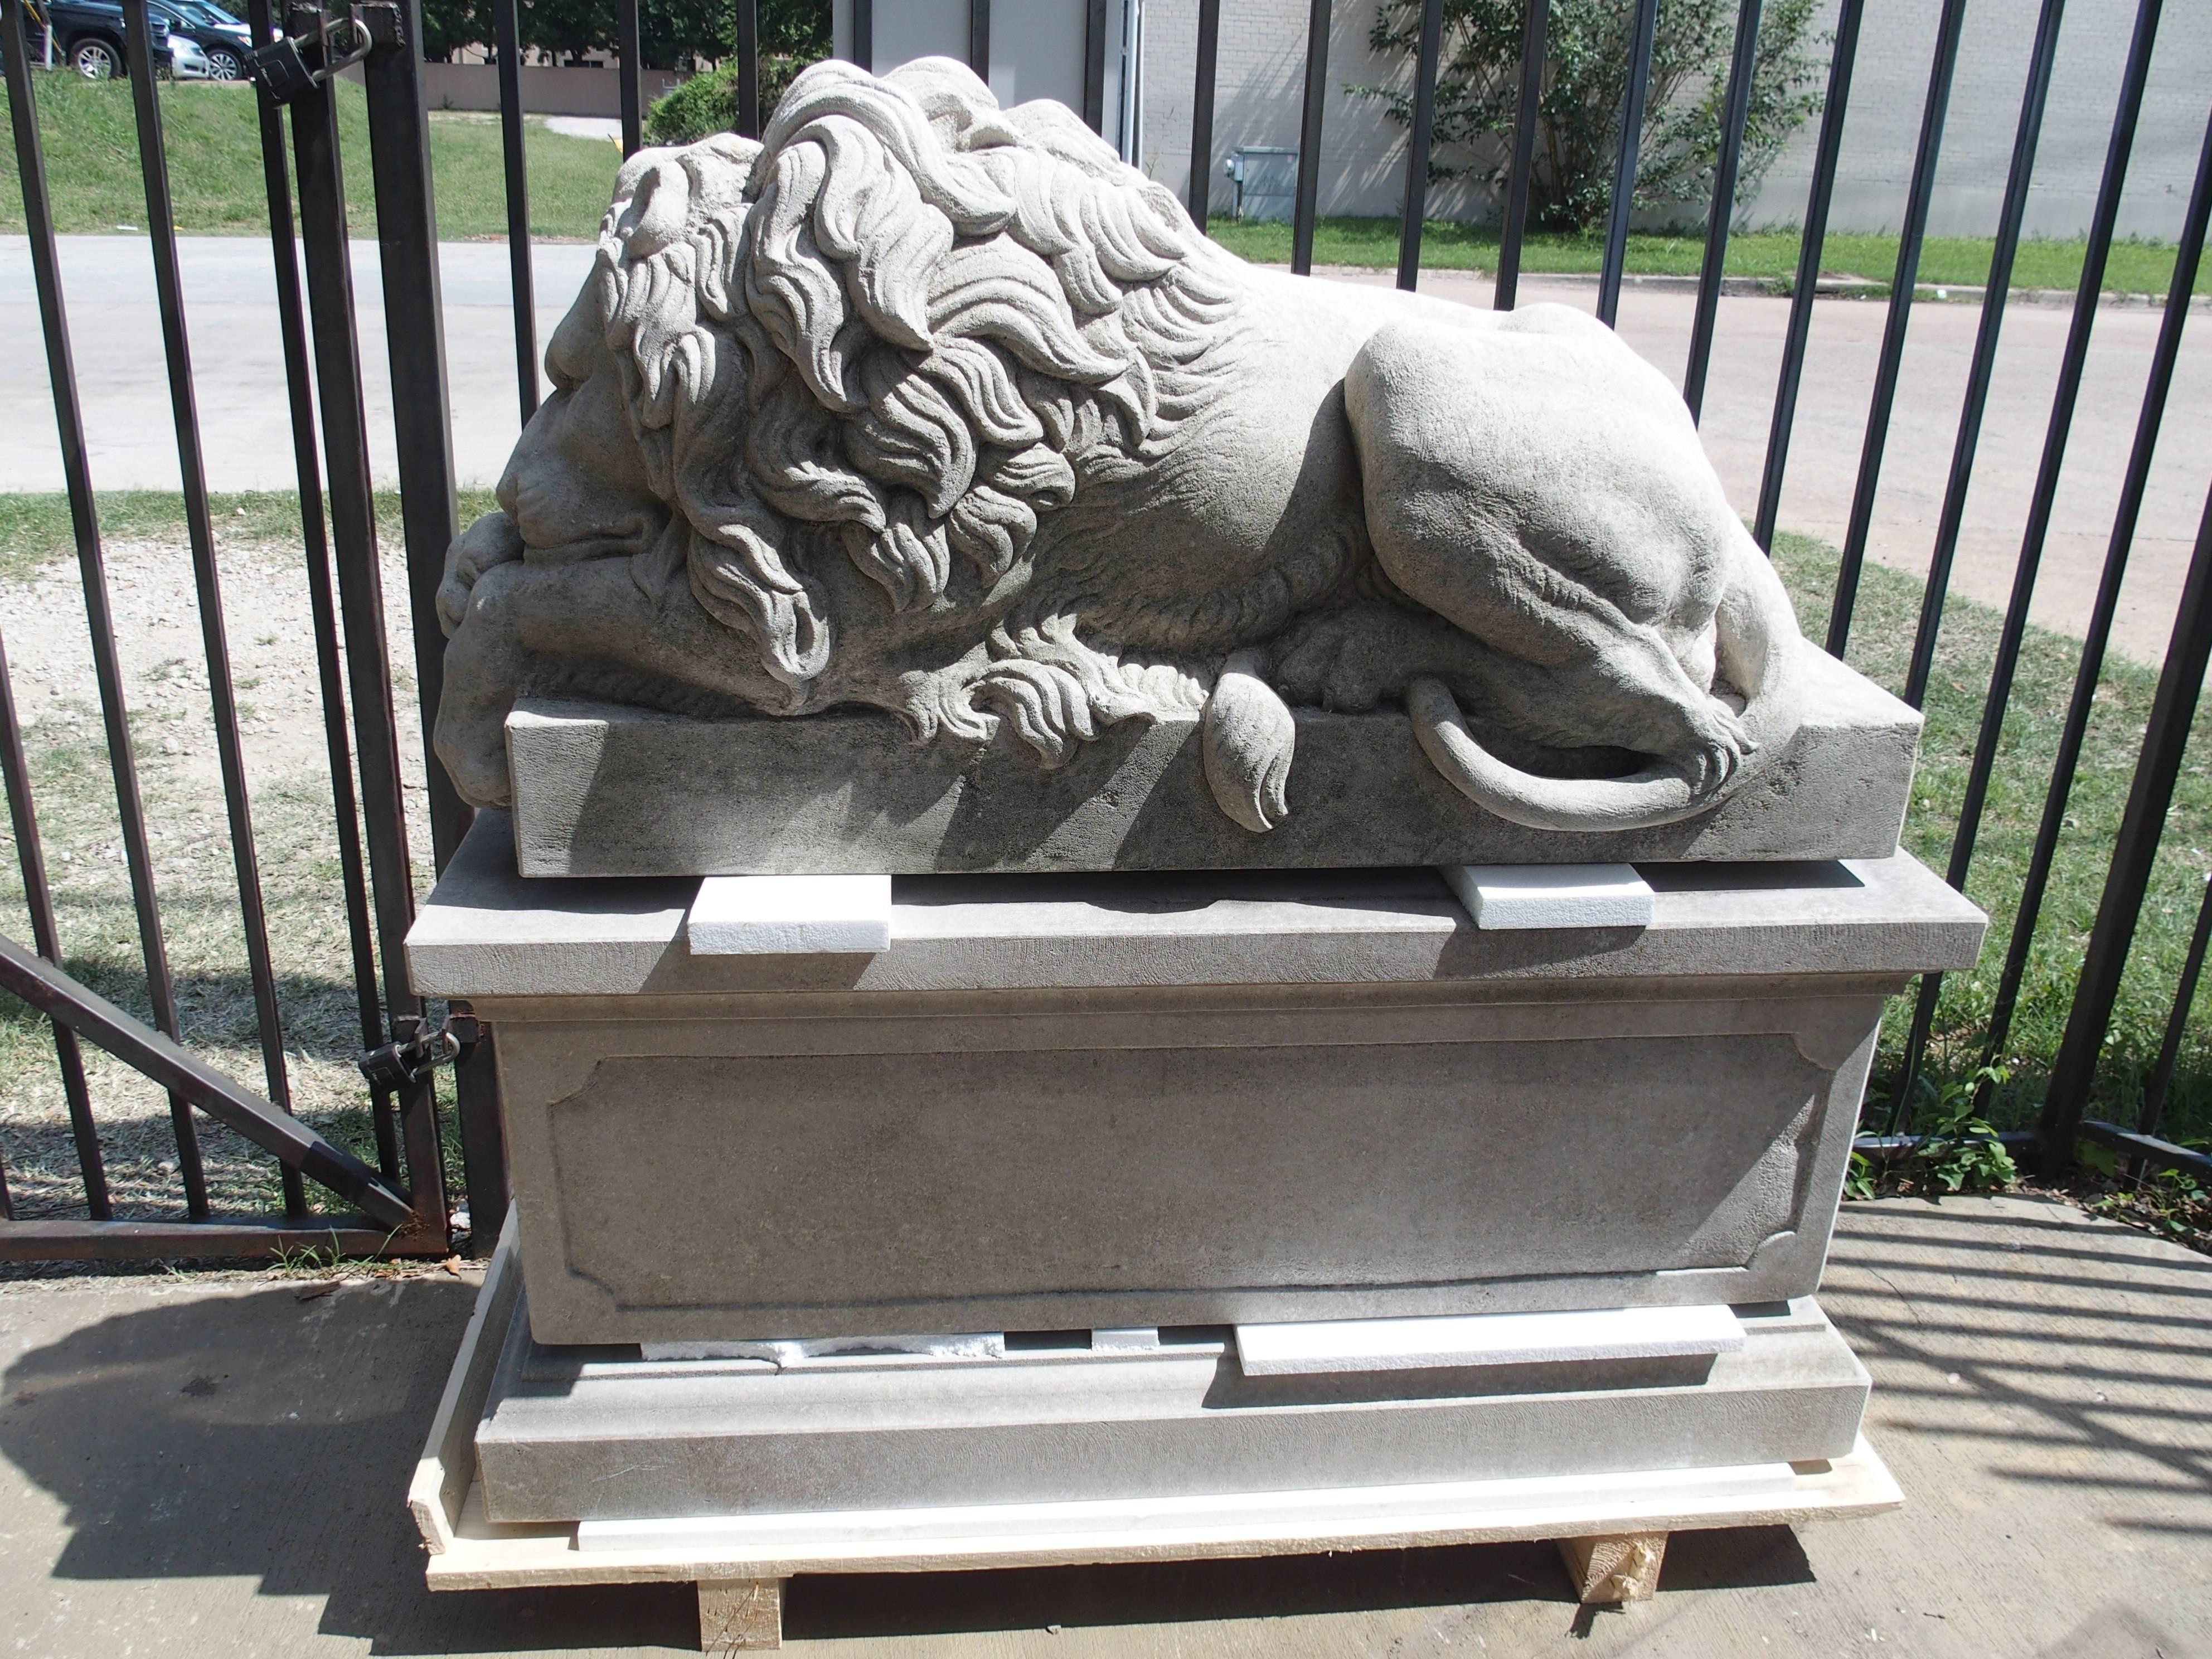 Pair of Large Carved Stone Lions on Pedestals, 